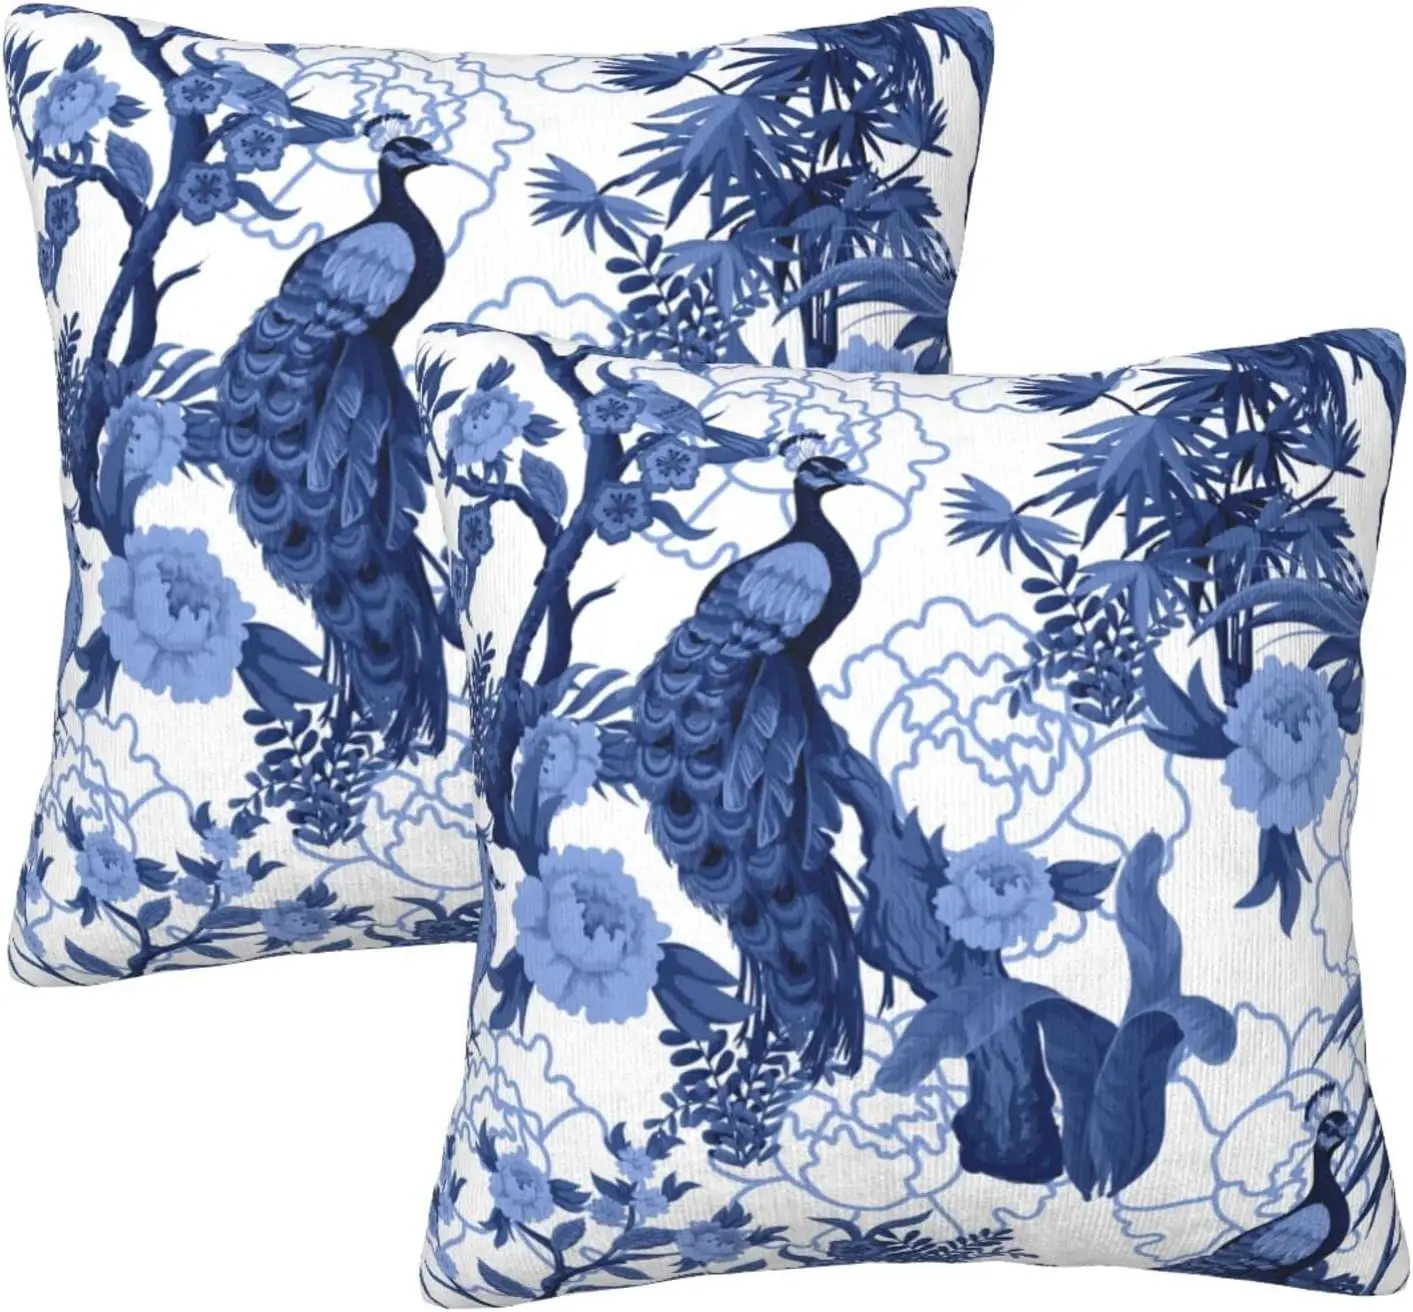 

Birds and Peonies in Blue Color Pillow Cover Case Peacock Chinoiserie Style with Invisible Zipper Cushion Cover 18x18in 2PC